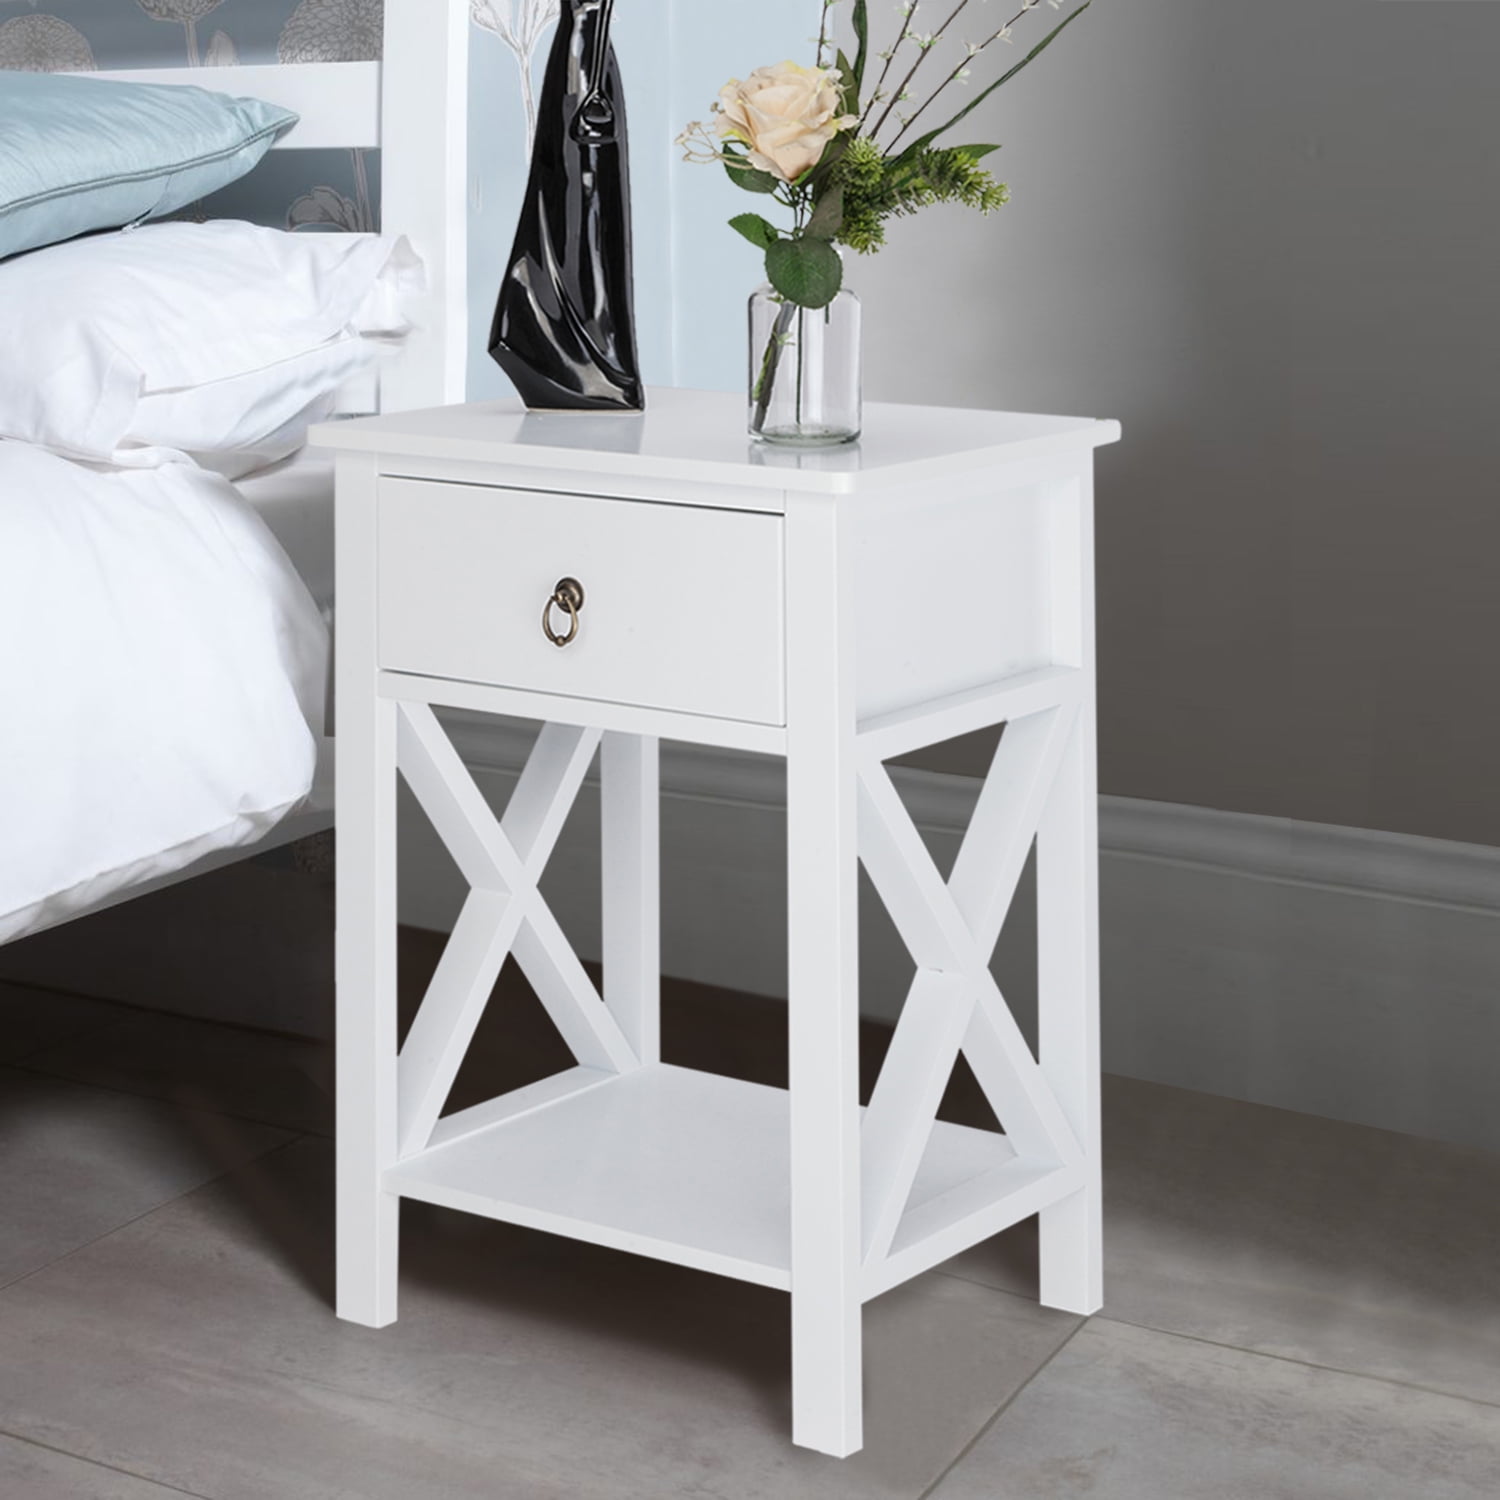 Lowestbest Bedside Table for Bedroom, Nightstand with Bin Drawer, End